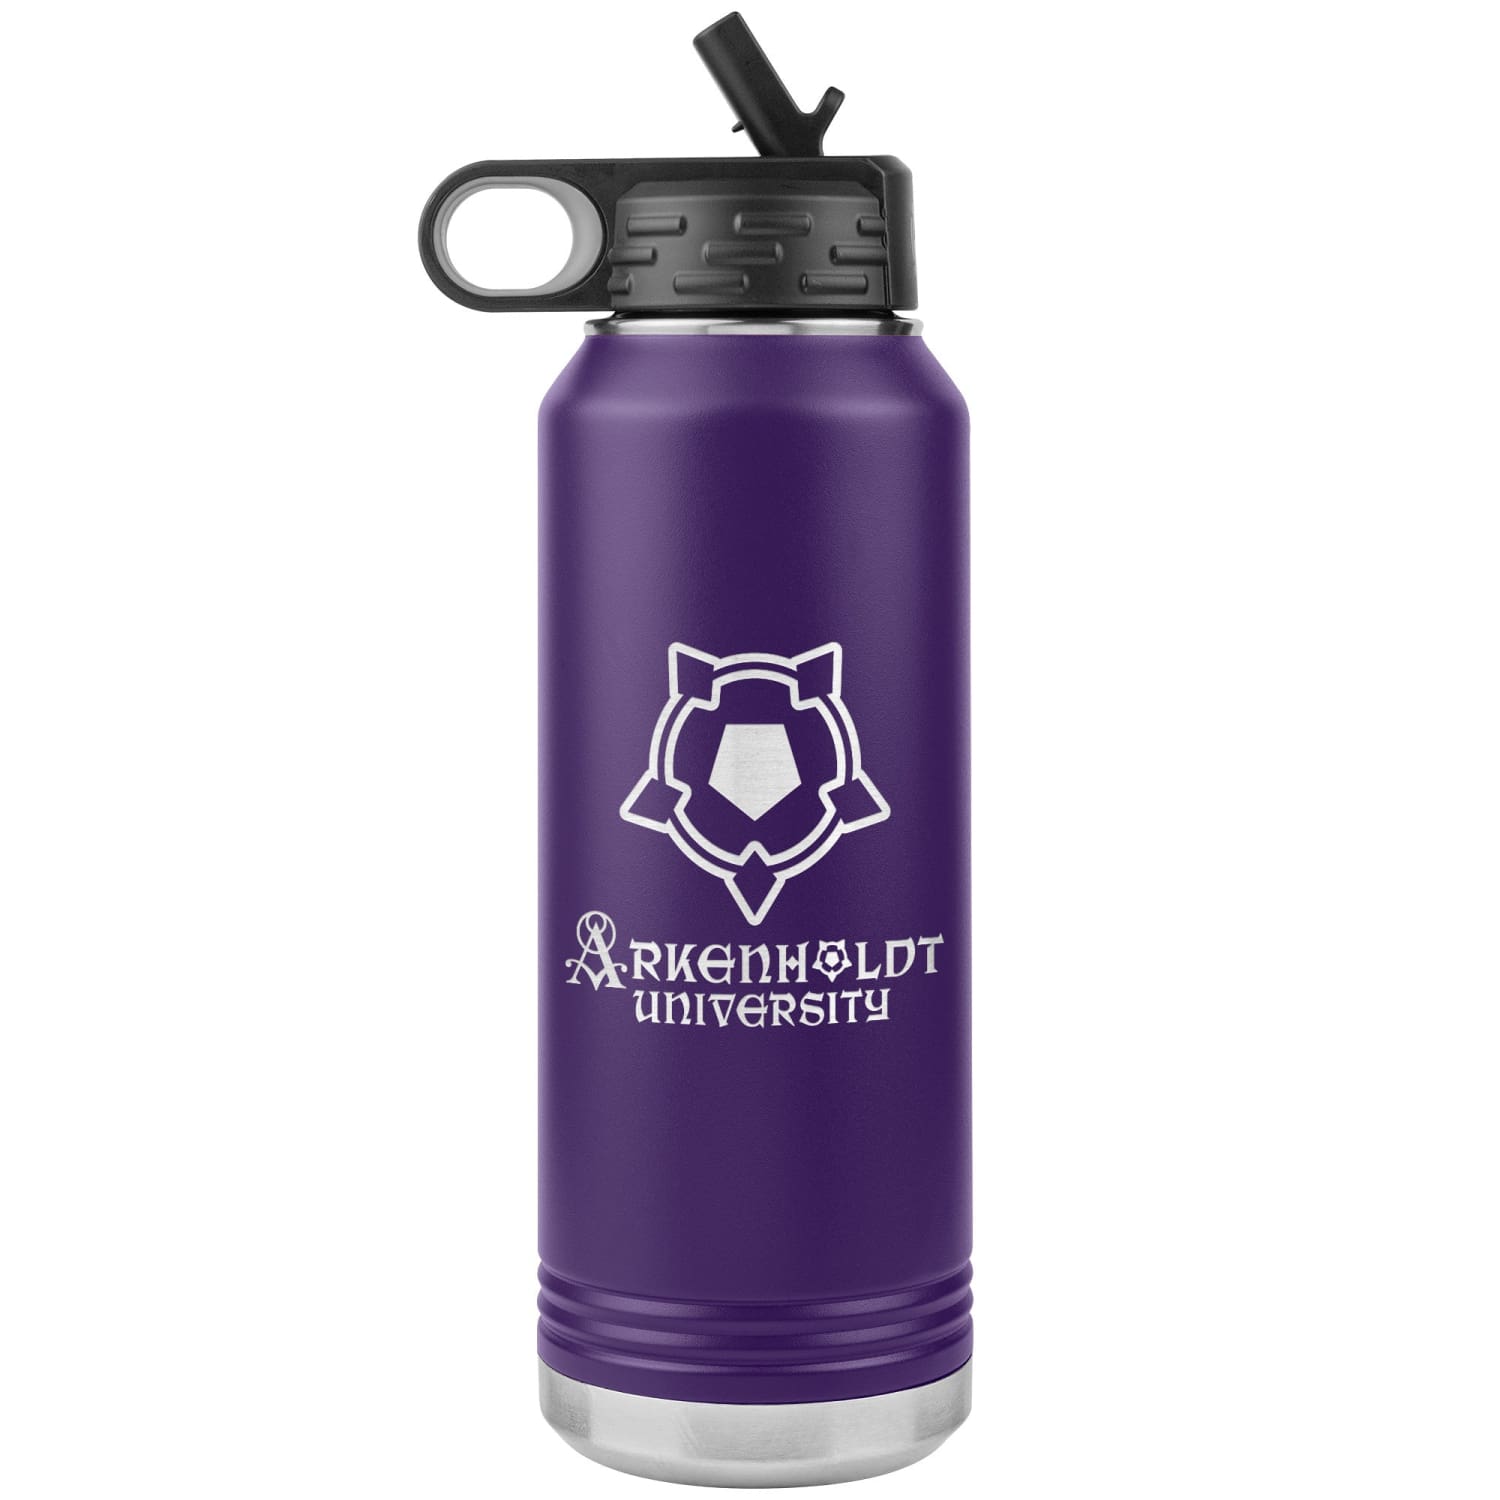 This Hydro Flask Tumbler Is Just $35 on  - Parade